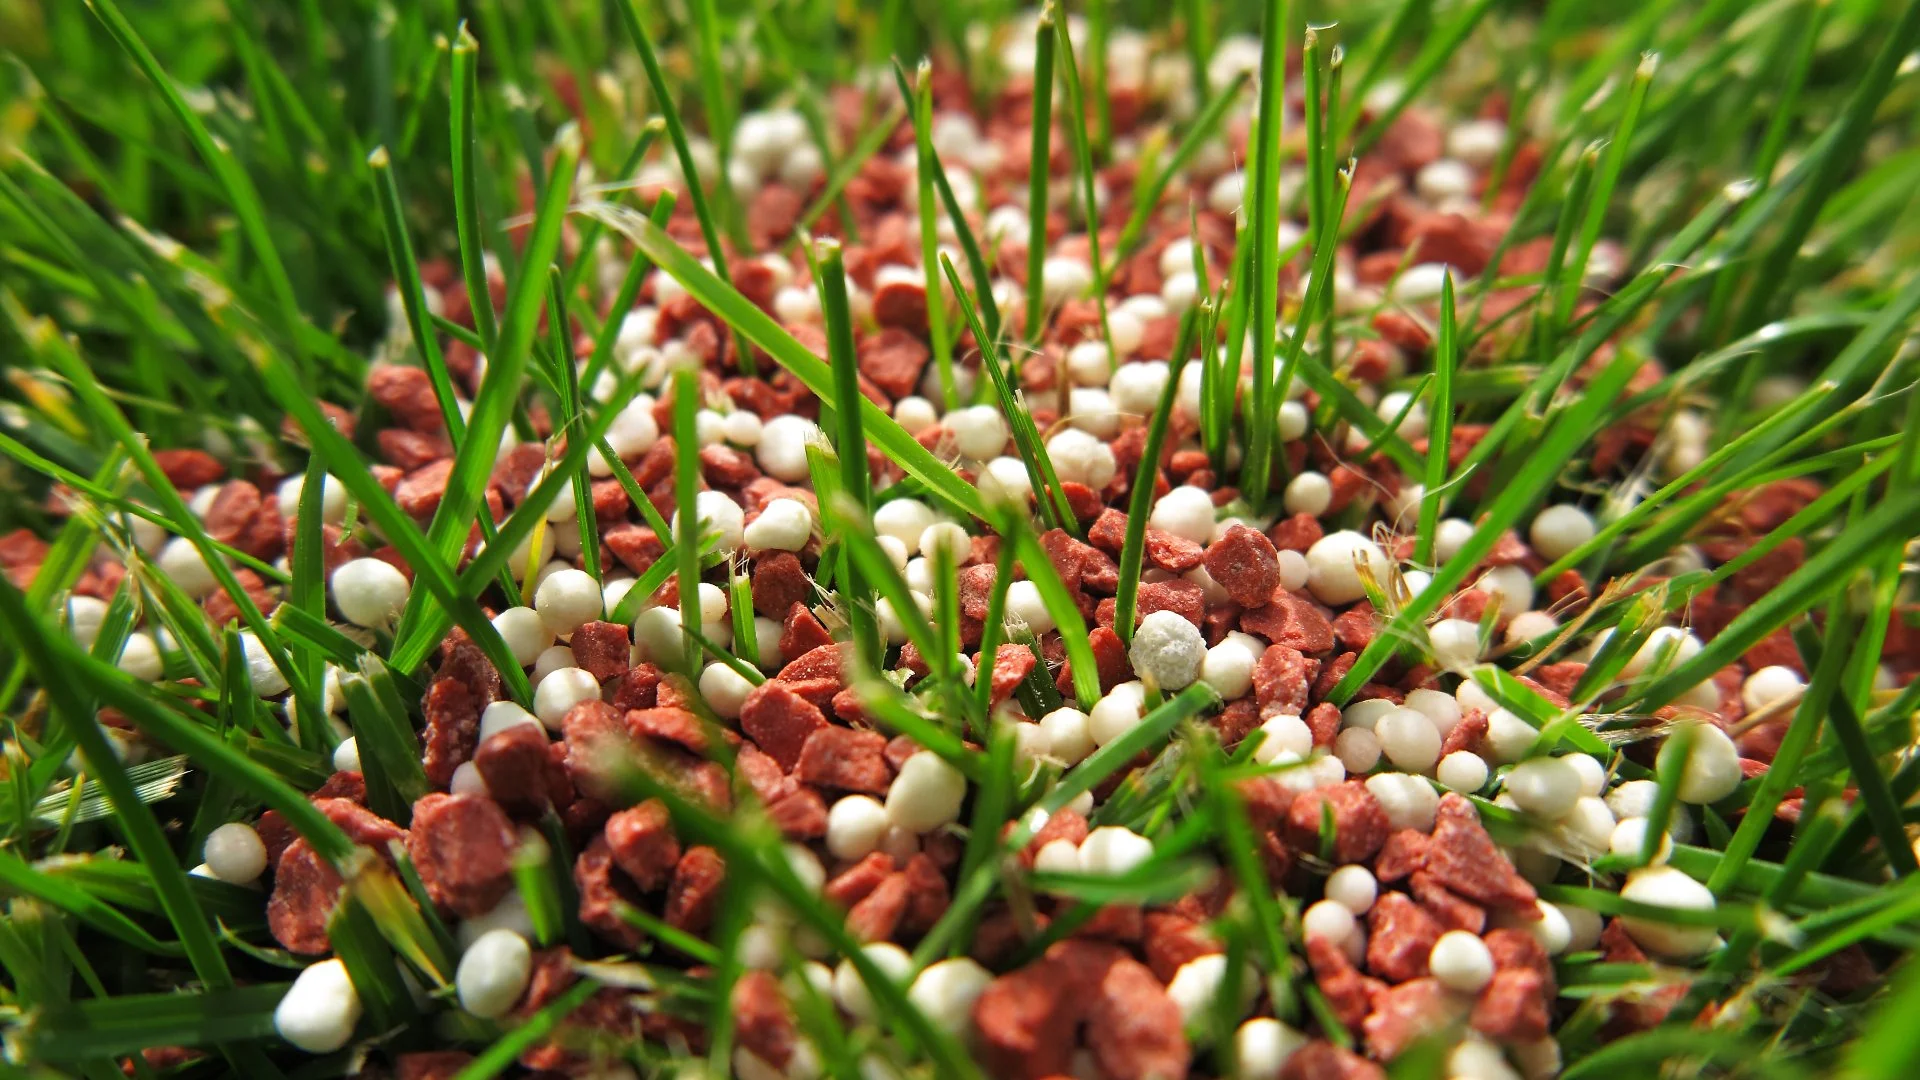 How Often Should I Fertilize My Lawn in Pennsylvania During the Fall?